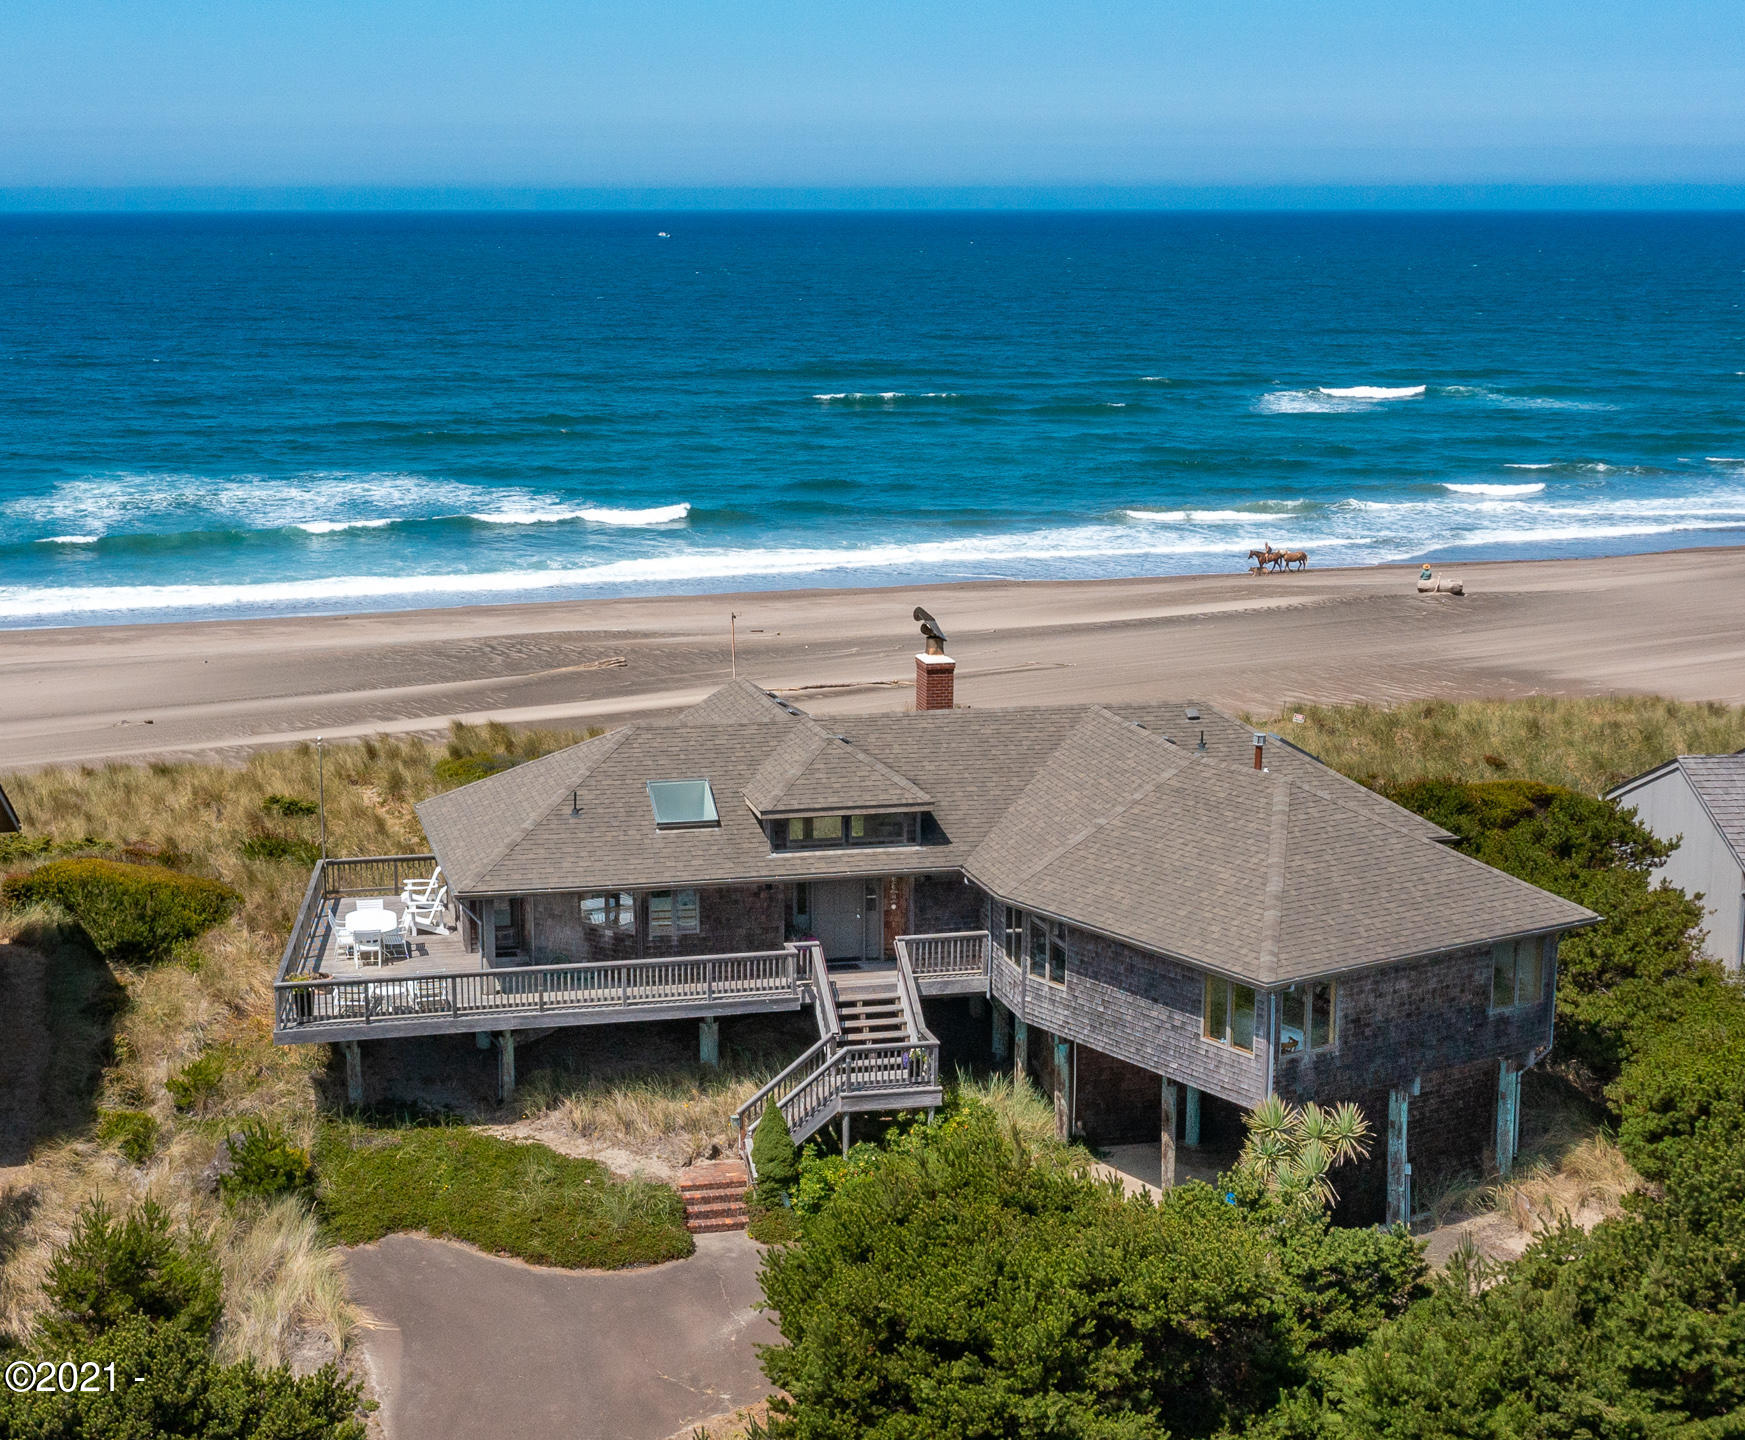 335 Salishan Dr Depoe Bay, Gleneden Beach, Lincoln City, Newport, Otis, Rose Lodge, Seal Rock, Waldport, Yachats, To Home Listings - Amy Plechaty, Emerald Coast Realty Real Estate, homes for sale, property for sale